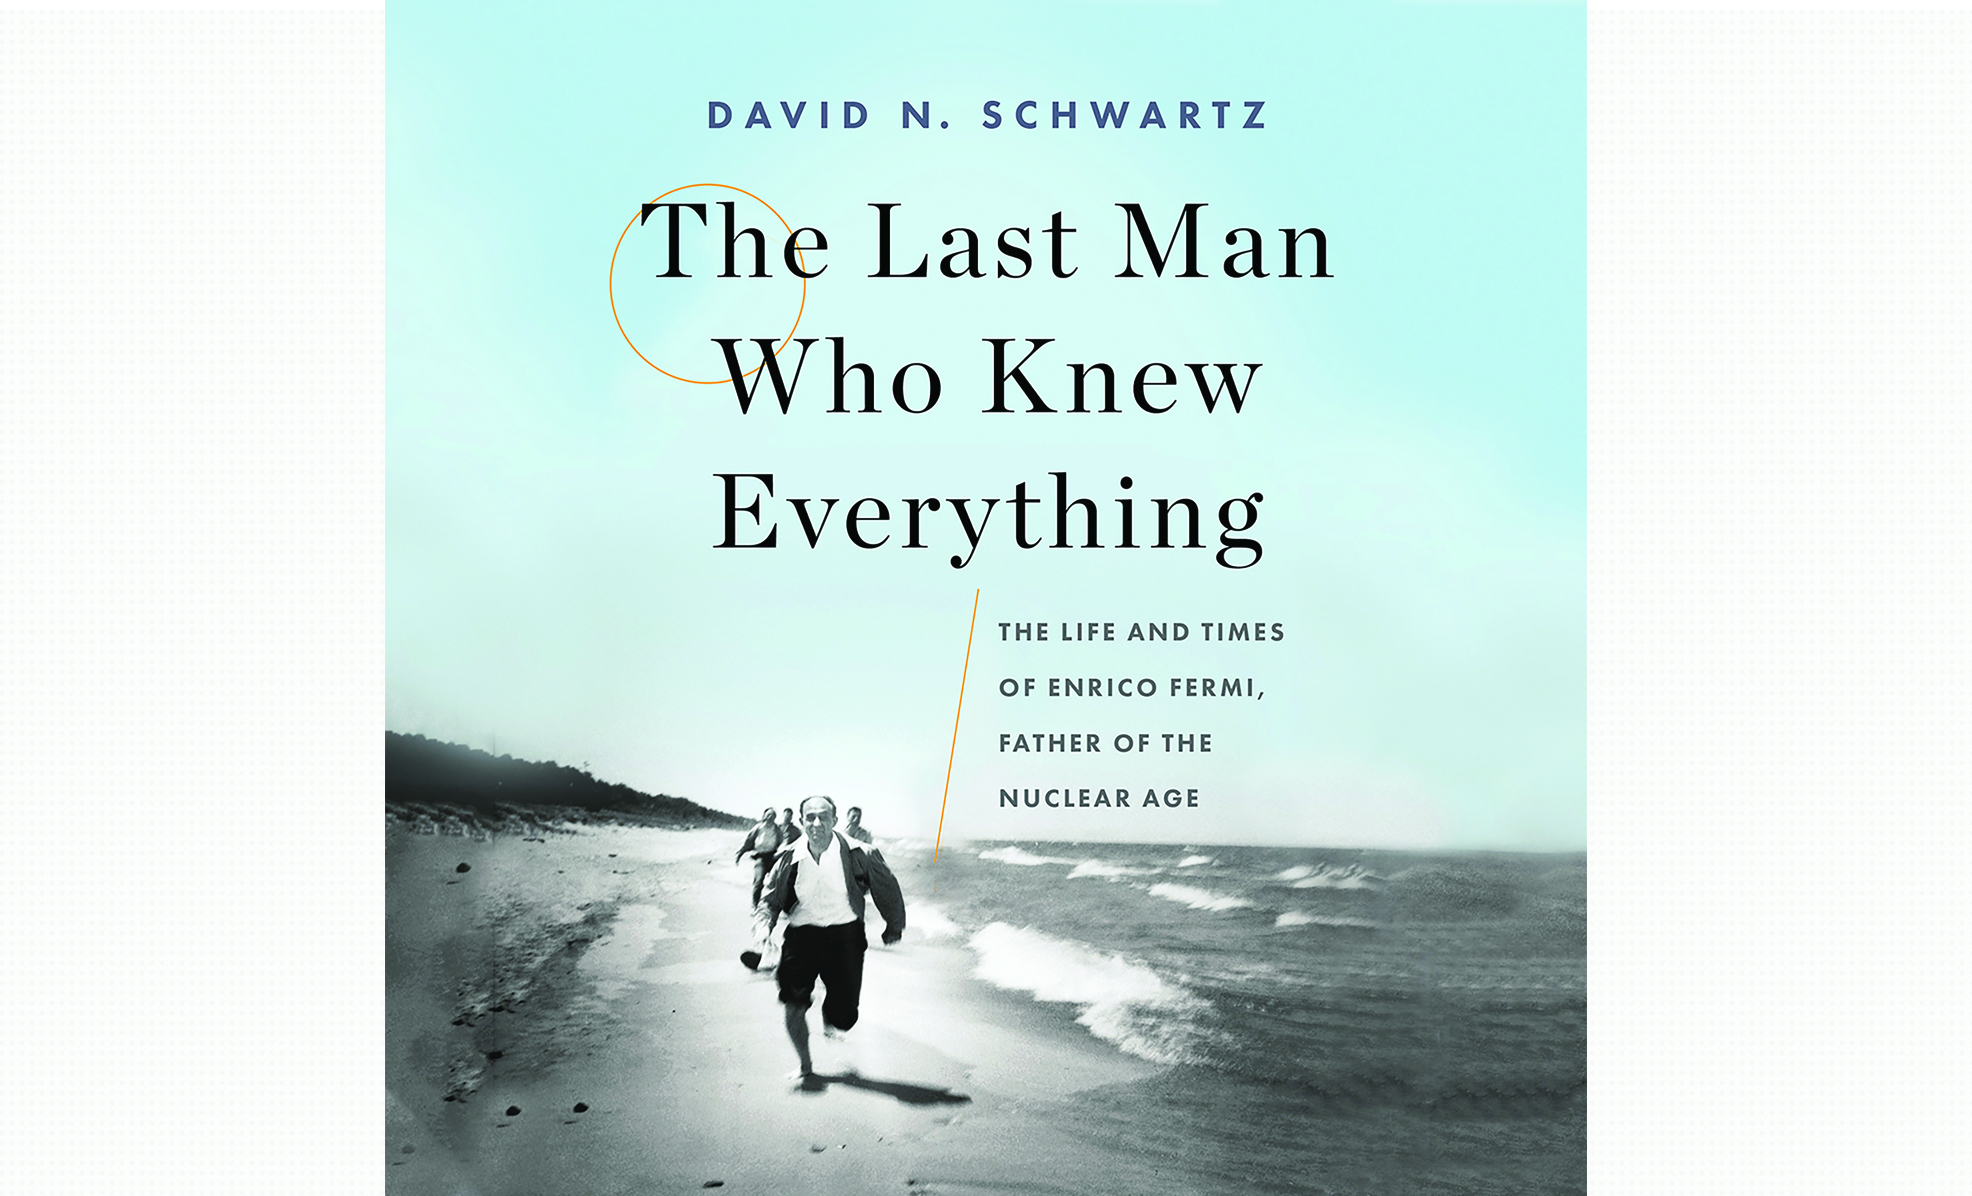 A photo of acclaimed scientist Enrico Fermi running down a beach, vying to beat his peers in a race, is a fitting metaphor for Fermi’s life and career, says biographer David N. Schwartz PhD ’80. 